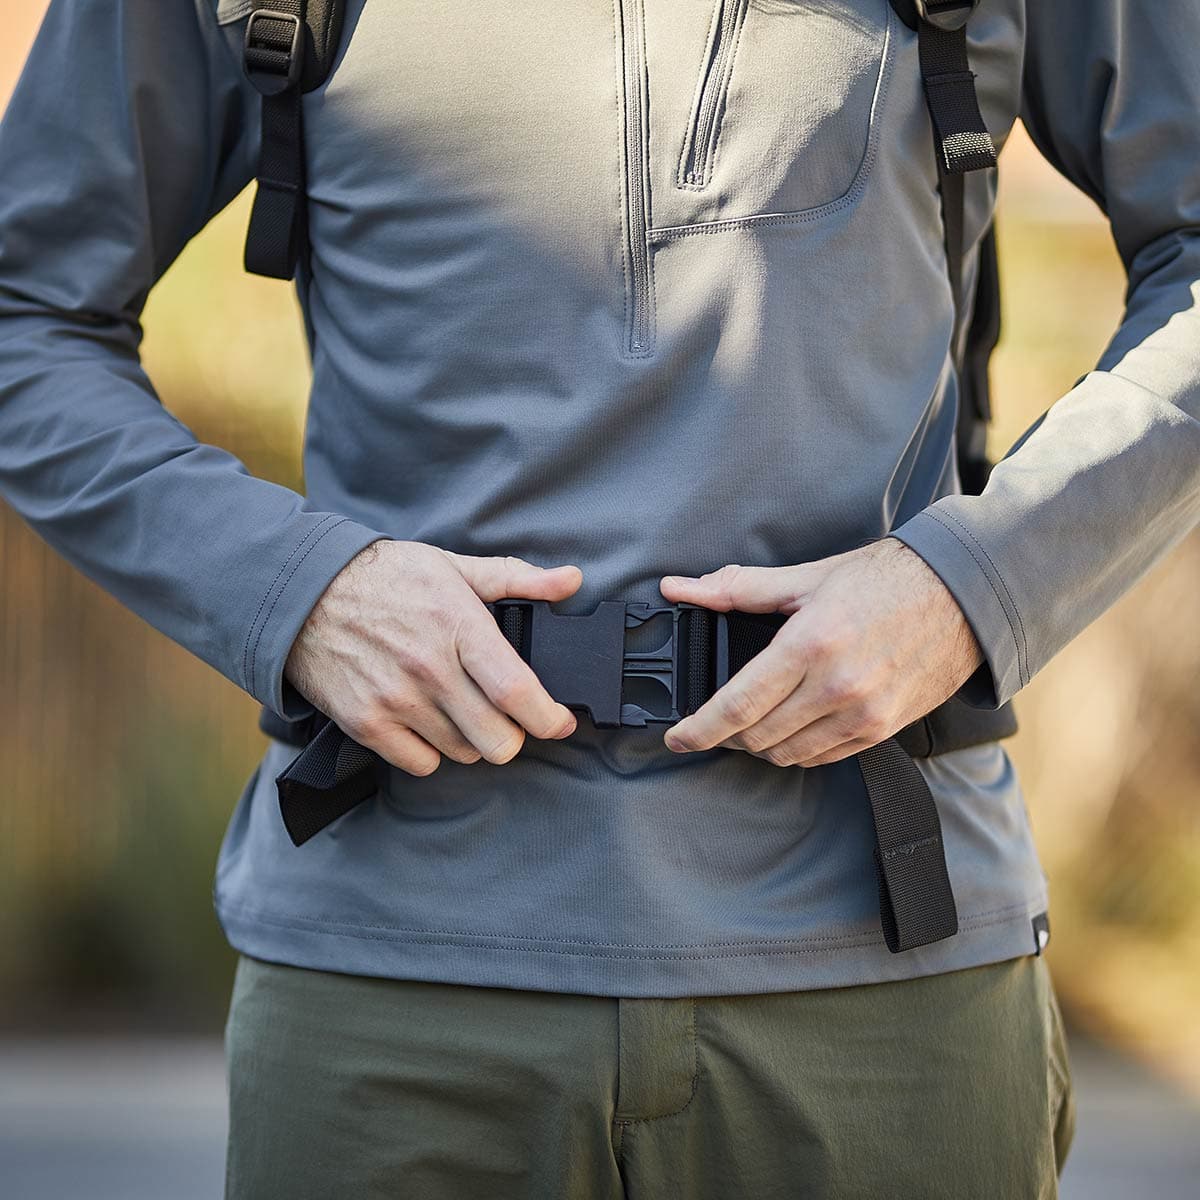 What is a hip belt?